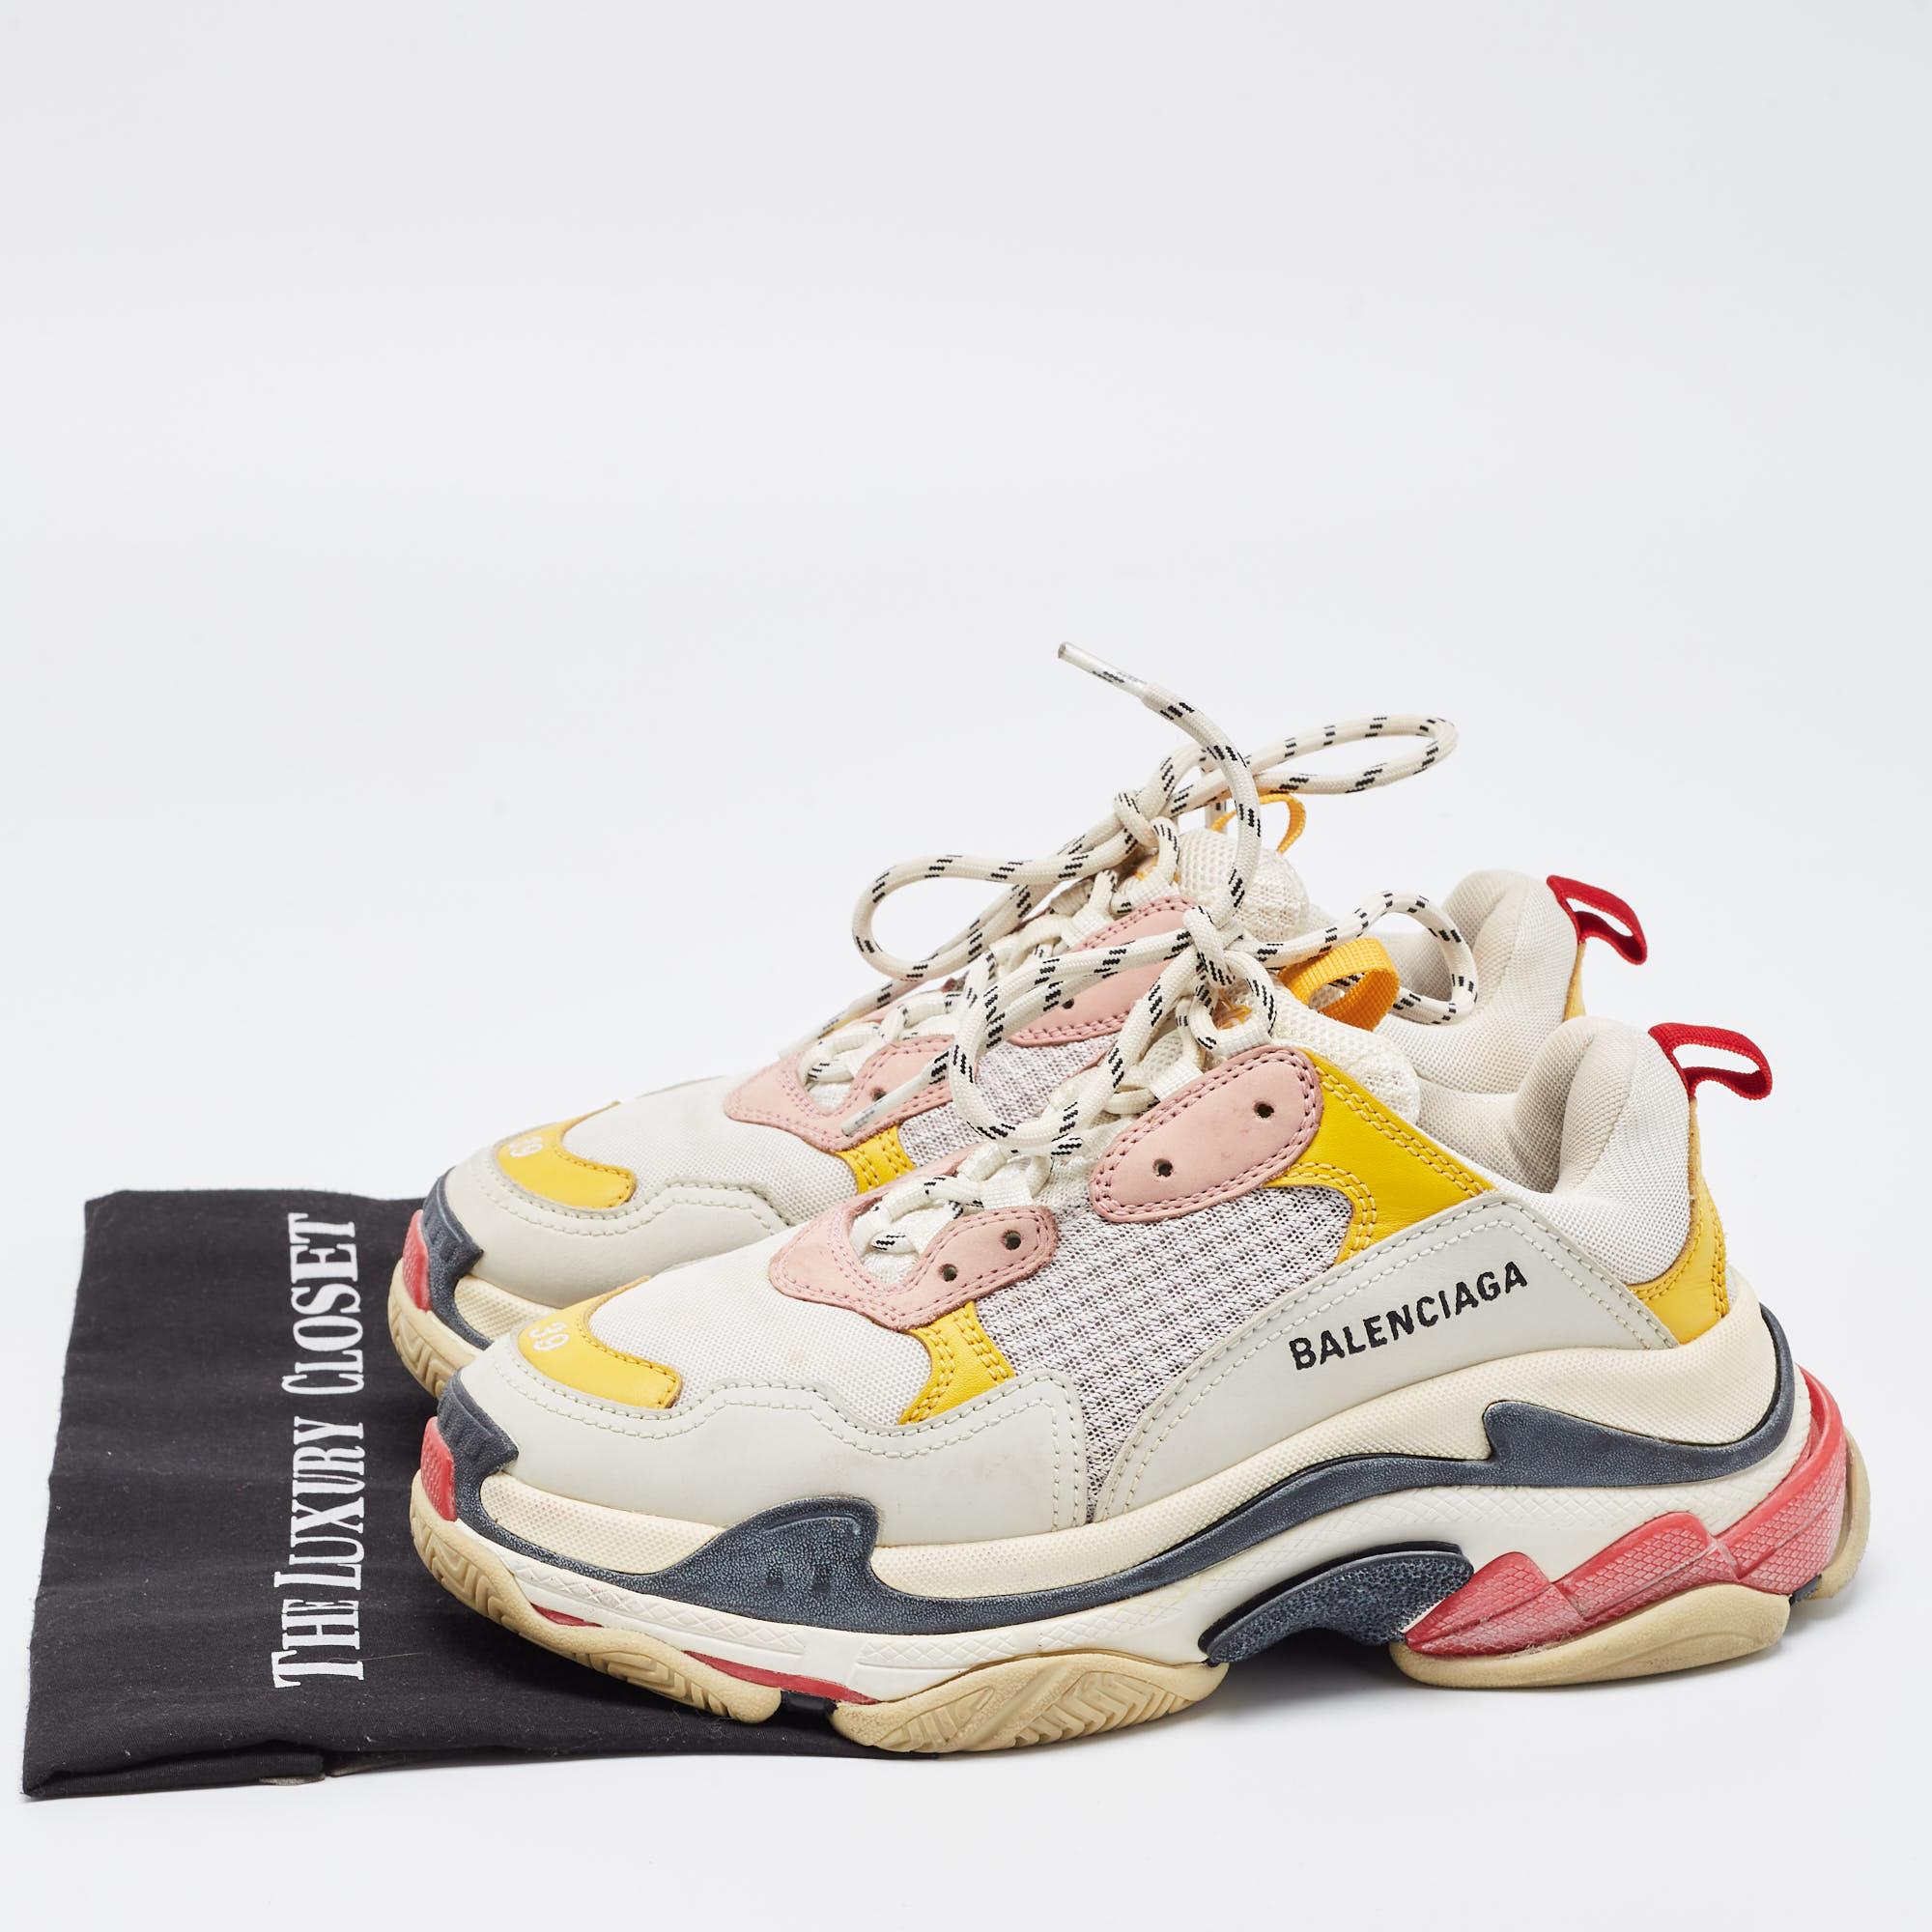 Balenciaga Multicolor Mesh And Leather Triple S Sneakers Size 39